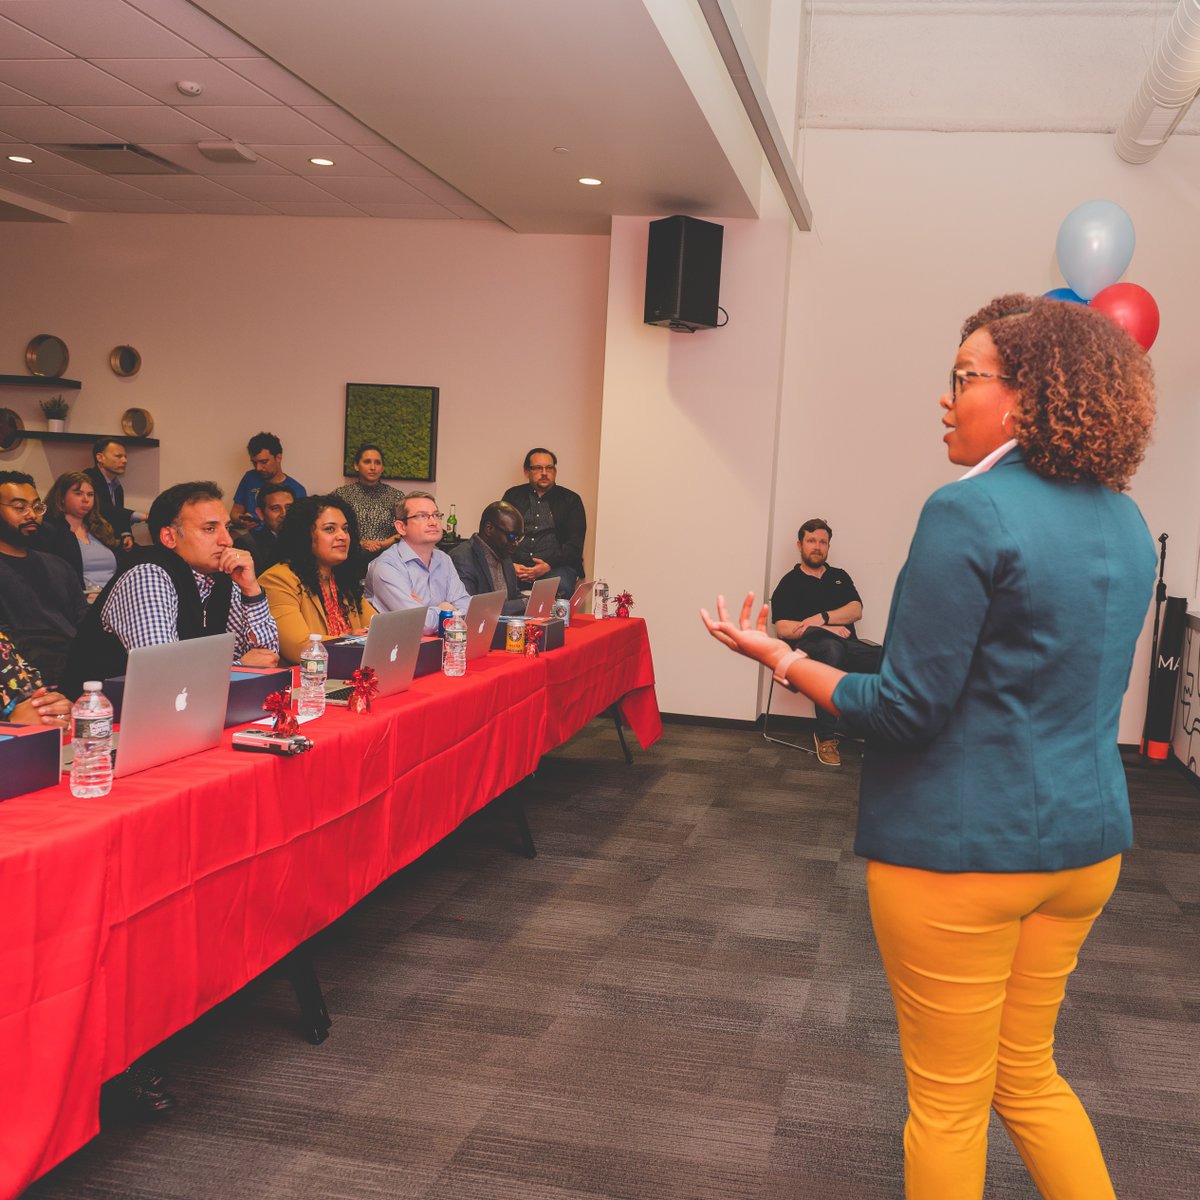 Did you know that in 2022 Black founders in the US raised 1% of total venture capital funding? This is why programs like the CBK Ventures Pitch Competition are so important to give underrepresented tech founders the opportunities they need. #BlackHistoryMonth #BlackFuturesMonth